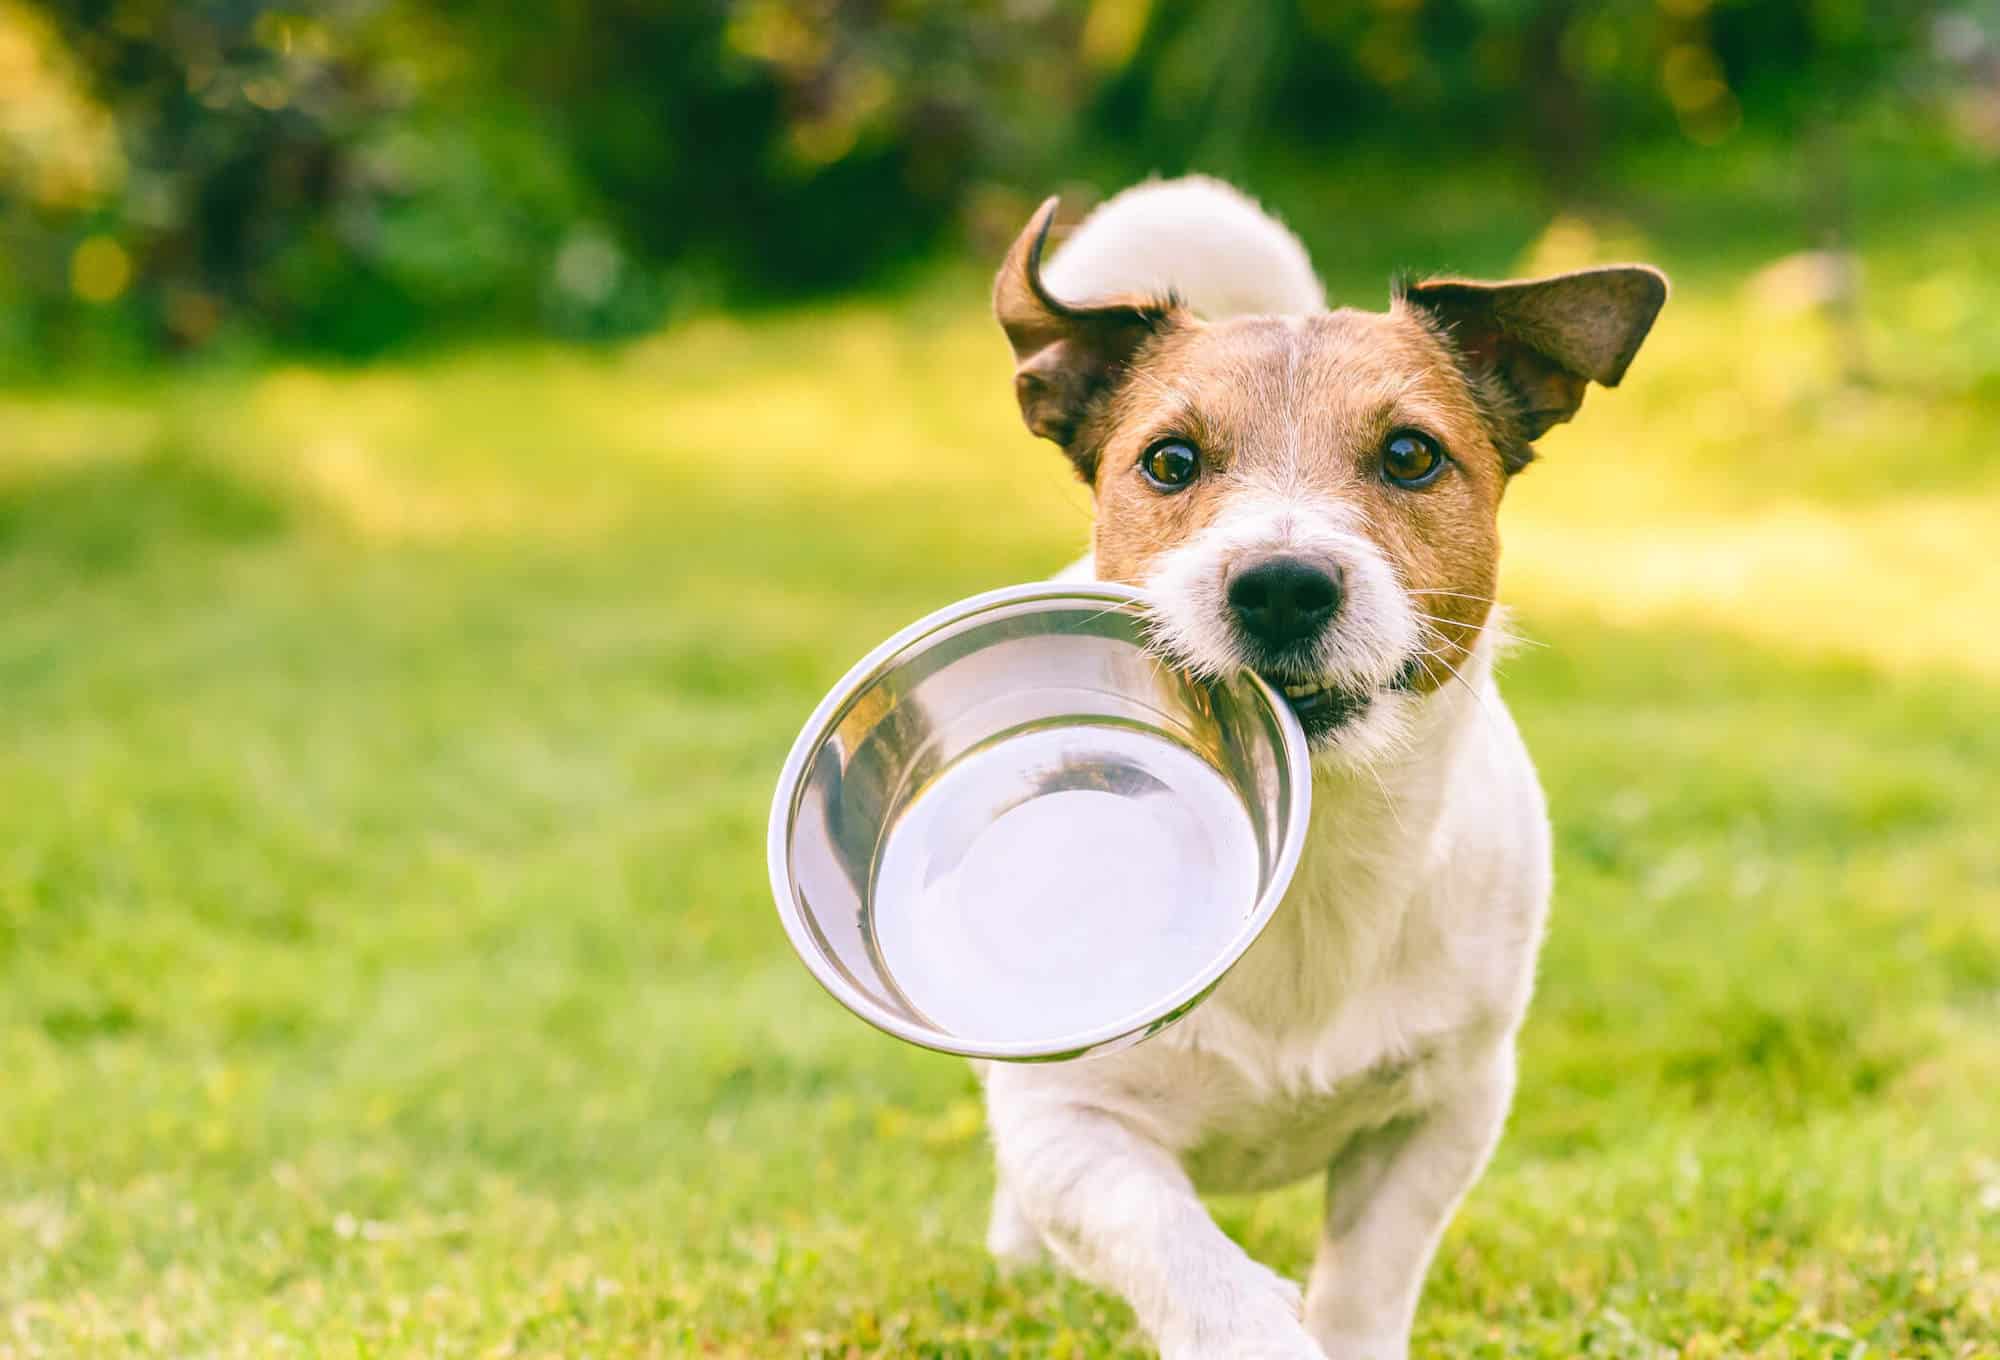 little dog running with a metal bowl in its mouth